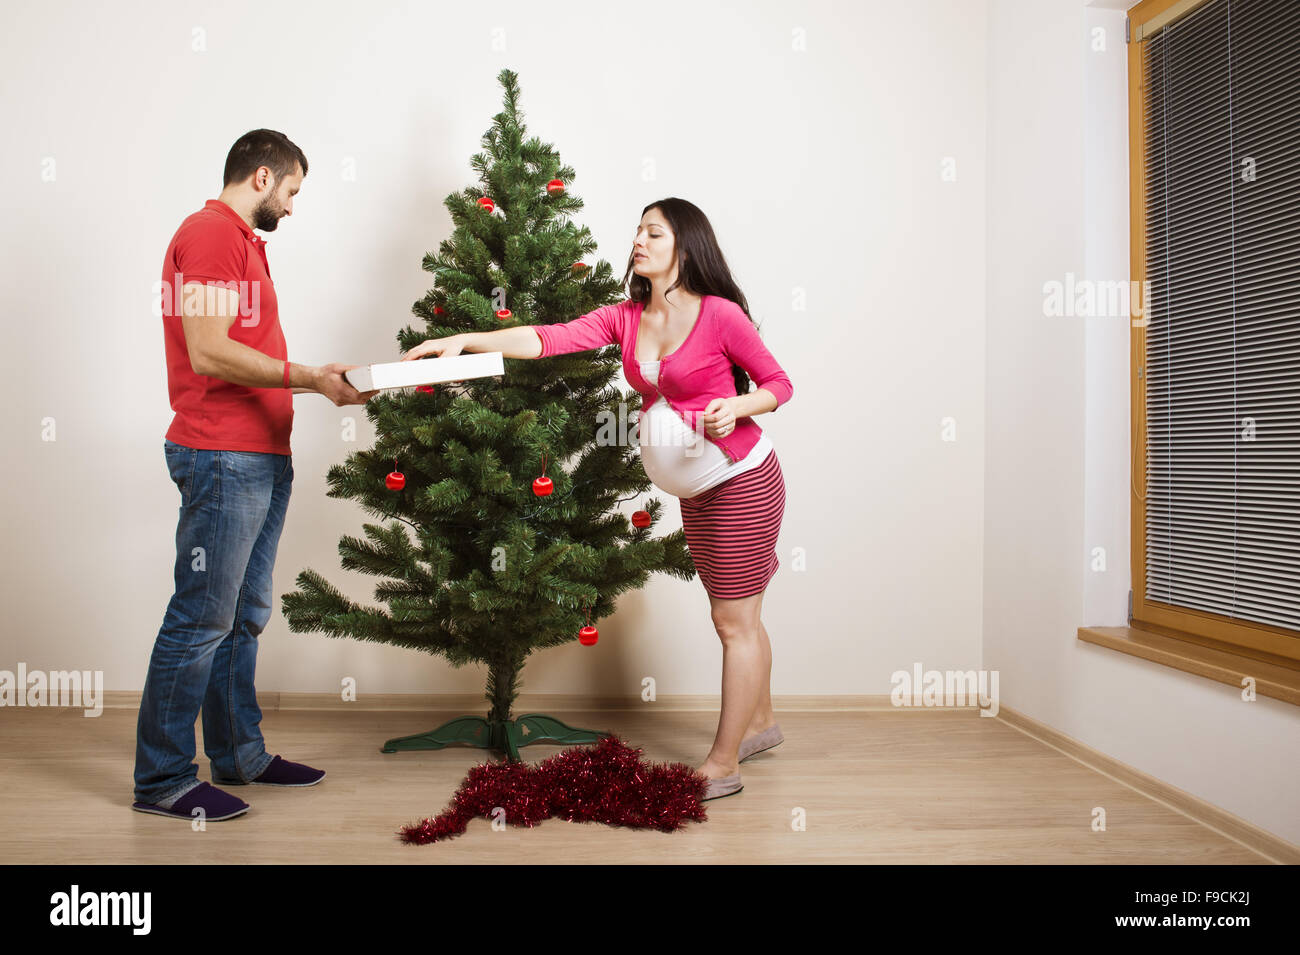 Young couple is decorating christmas tree. Woman is pregnant. Stock Photo